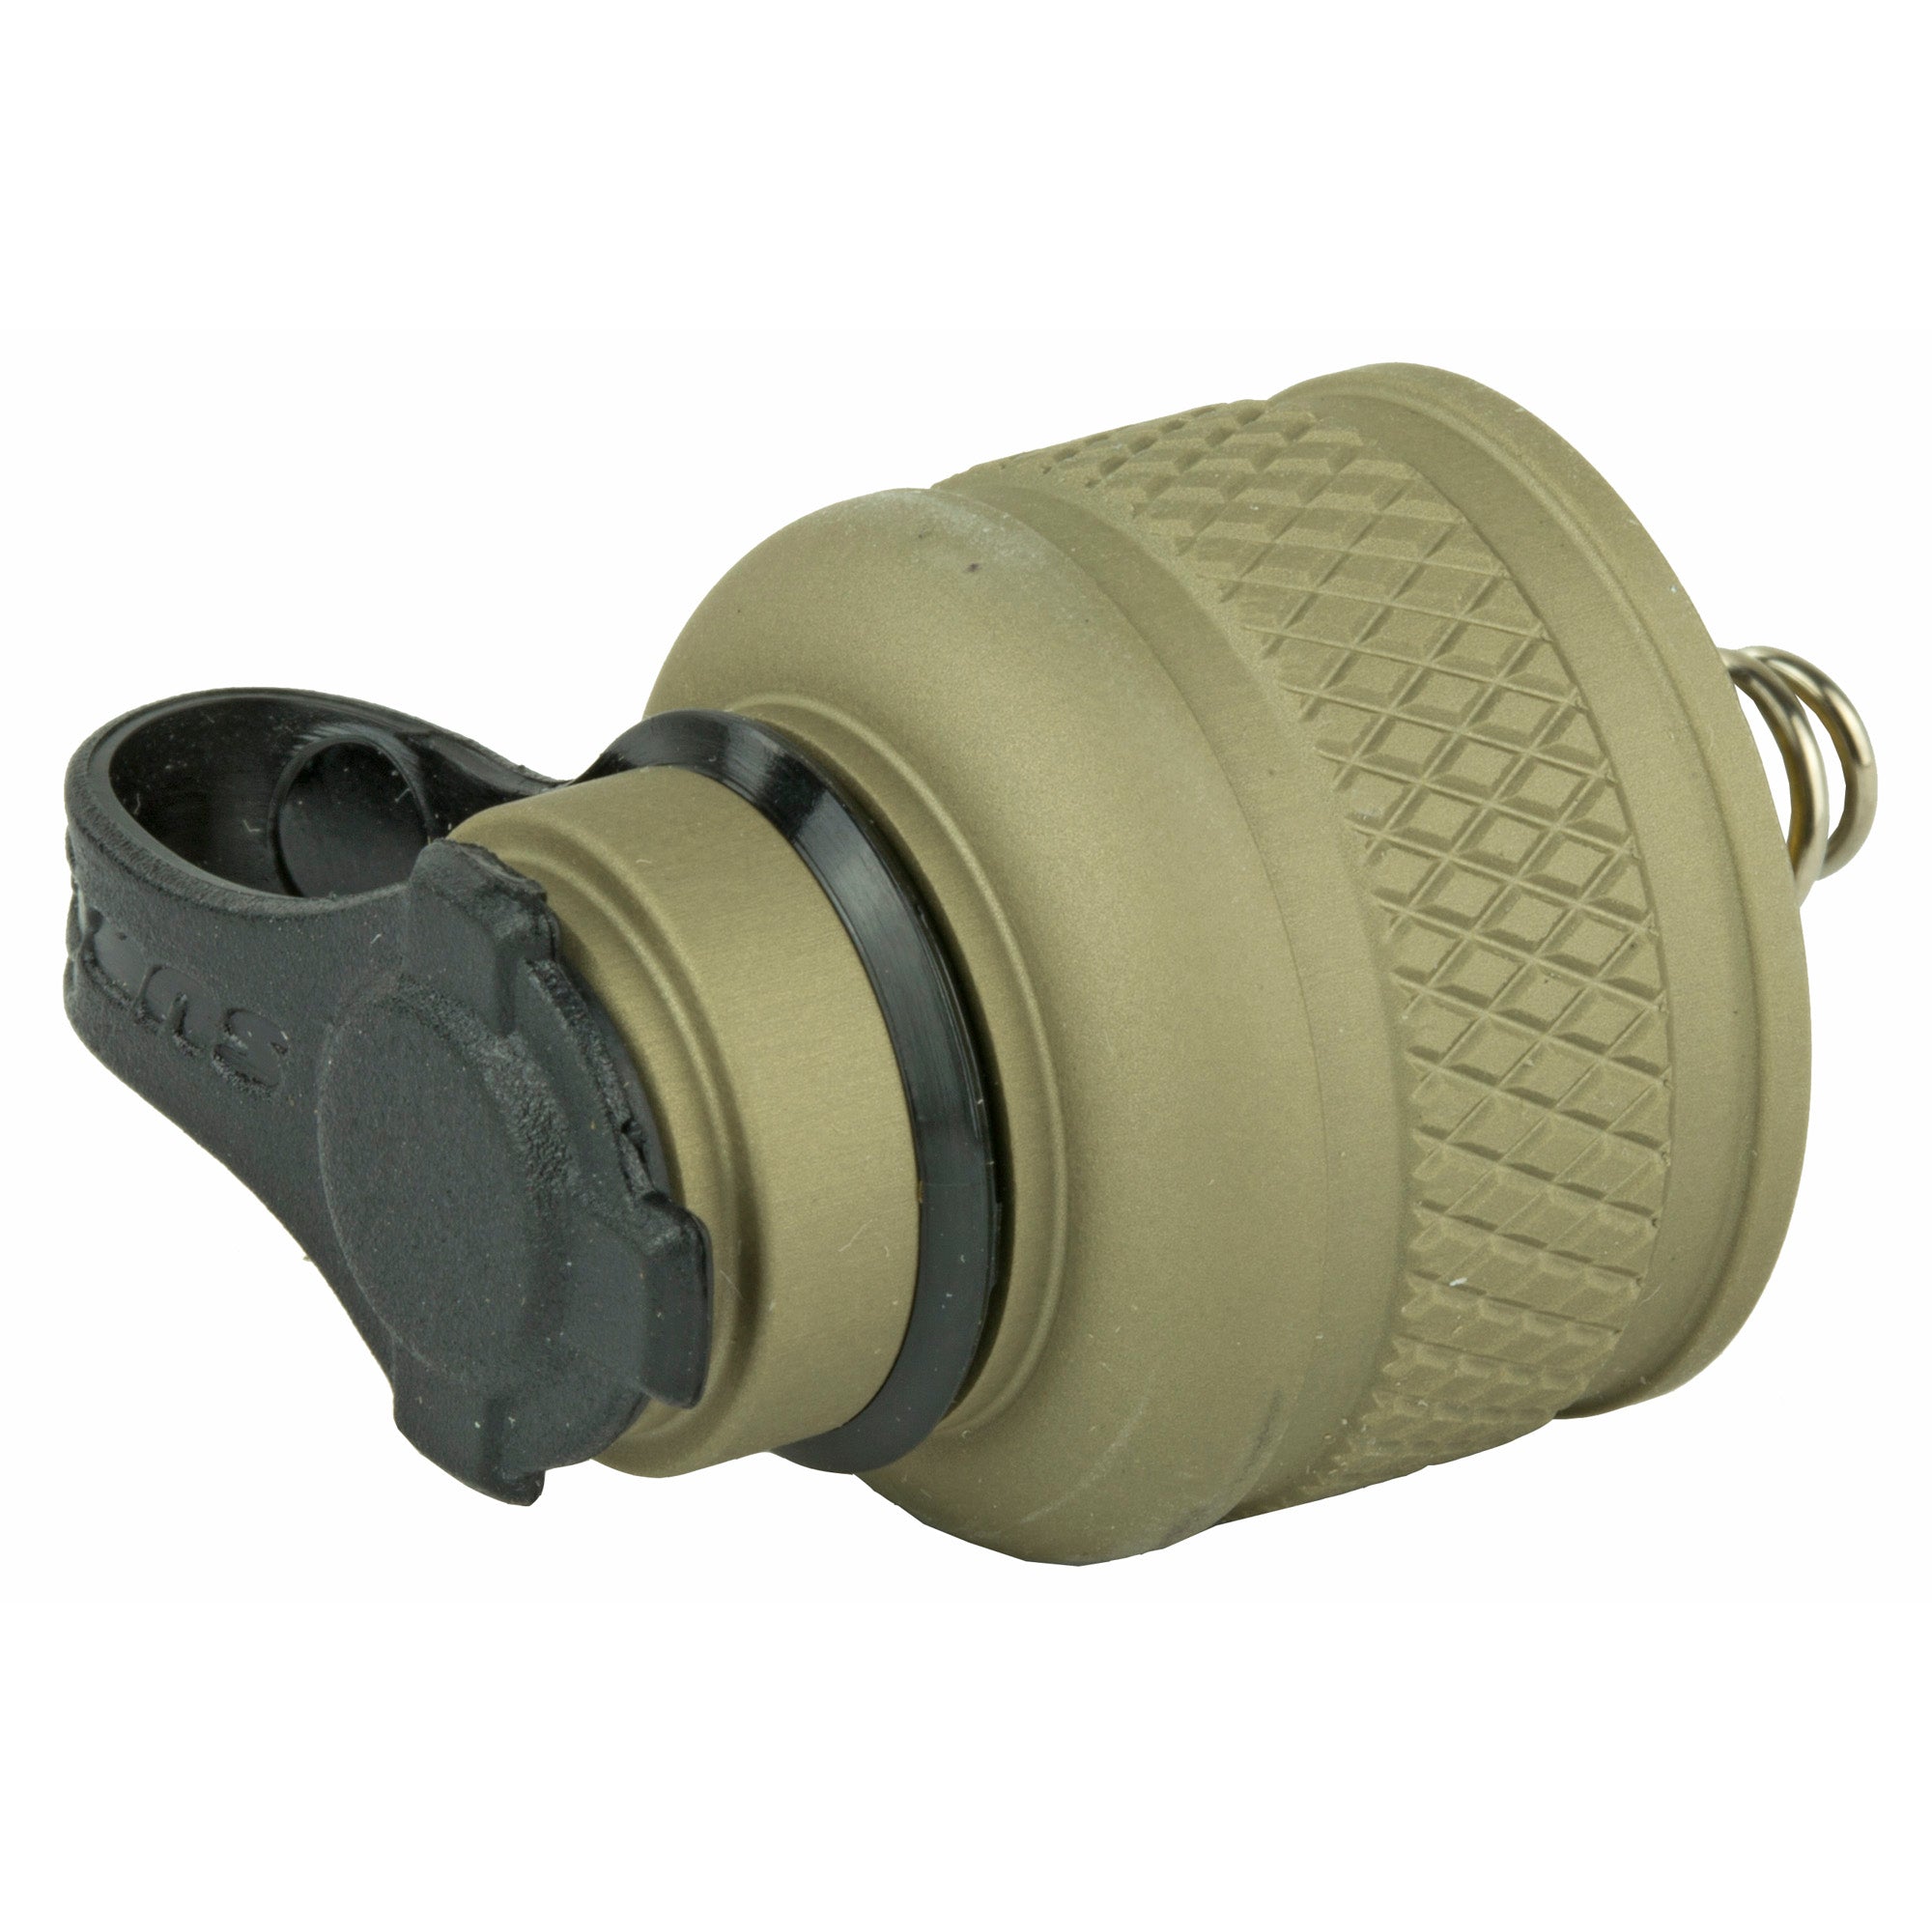 Surefire Replacement Rear Cap in tan for M300/M600 Scout Lights, made of aerospace-grade aluminum with a lock-out feature to prevent accidental activation.